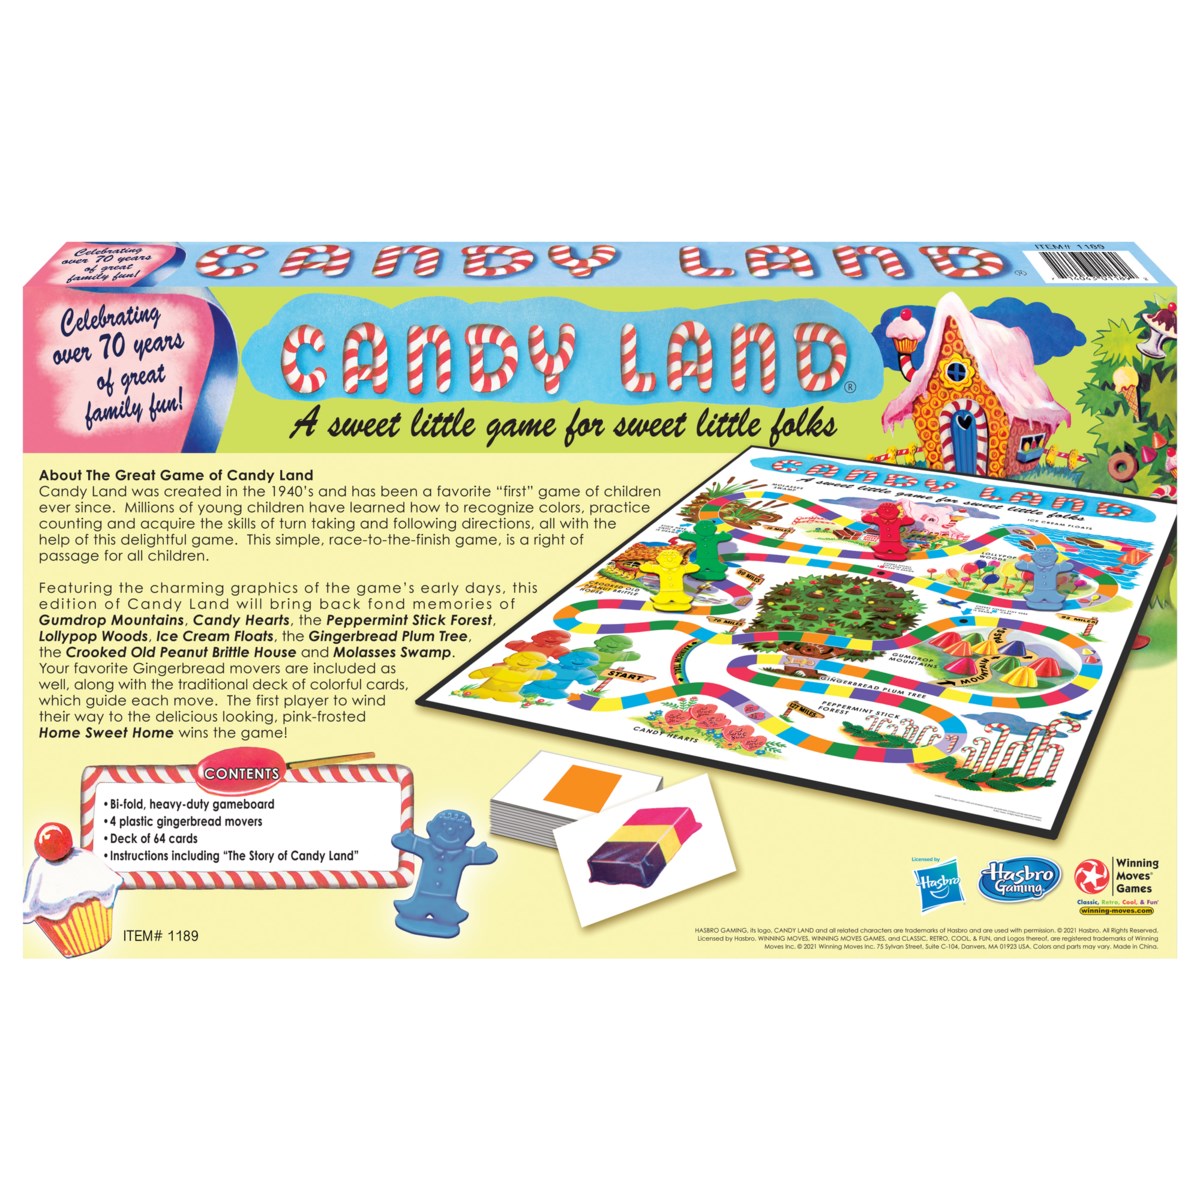 CANDY LAND 65TH ANNIVERSARY GAME (6) ENG